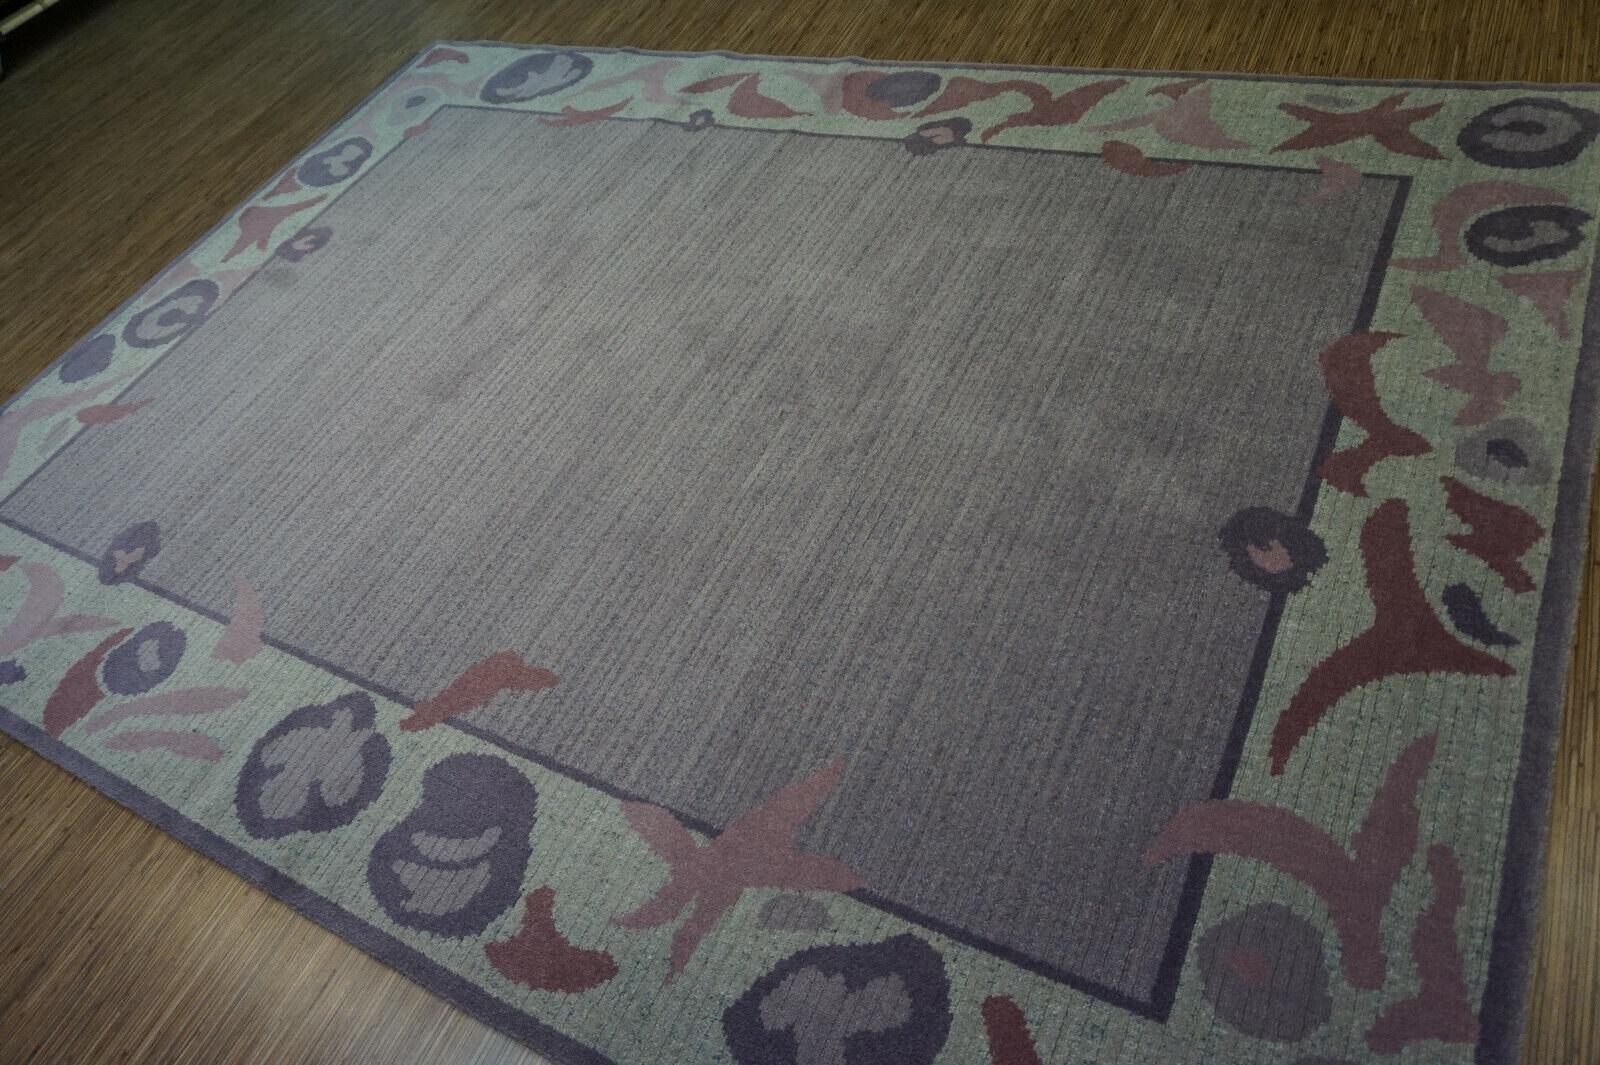 Vintage Dutch Geometric Purple B&C Rug

This vintage Dutch geometric purple B&C rug is a stunning piece of decor that will add a touch of color and style to your home. Made in Holland in the 1970s, this rug is crafted from acrylic, a synthetic